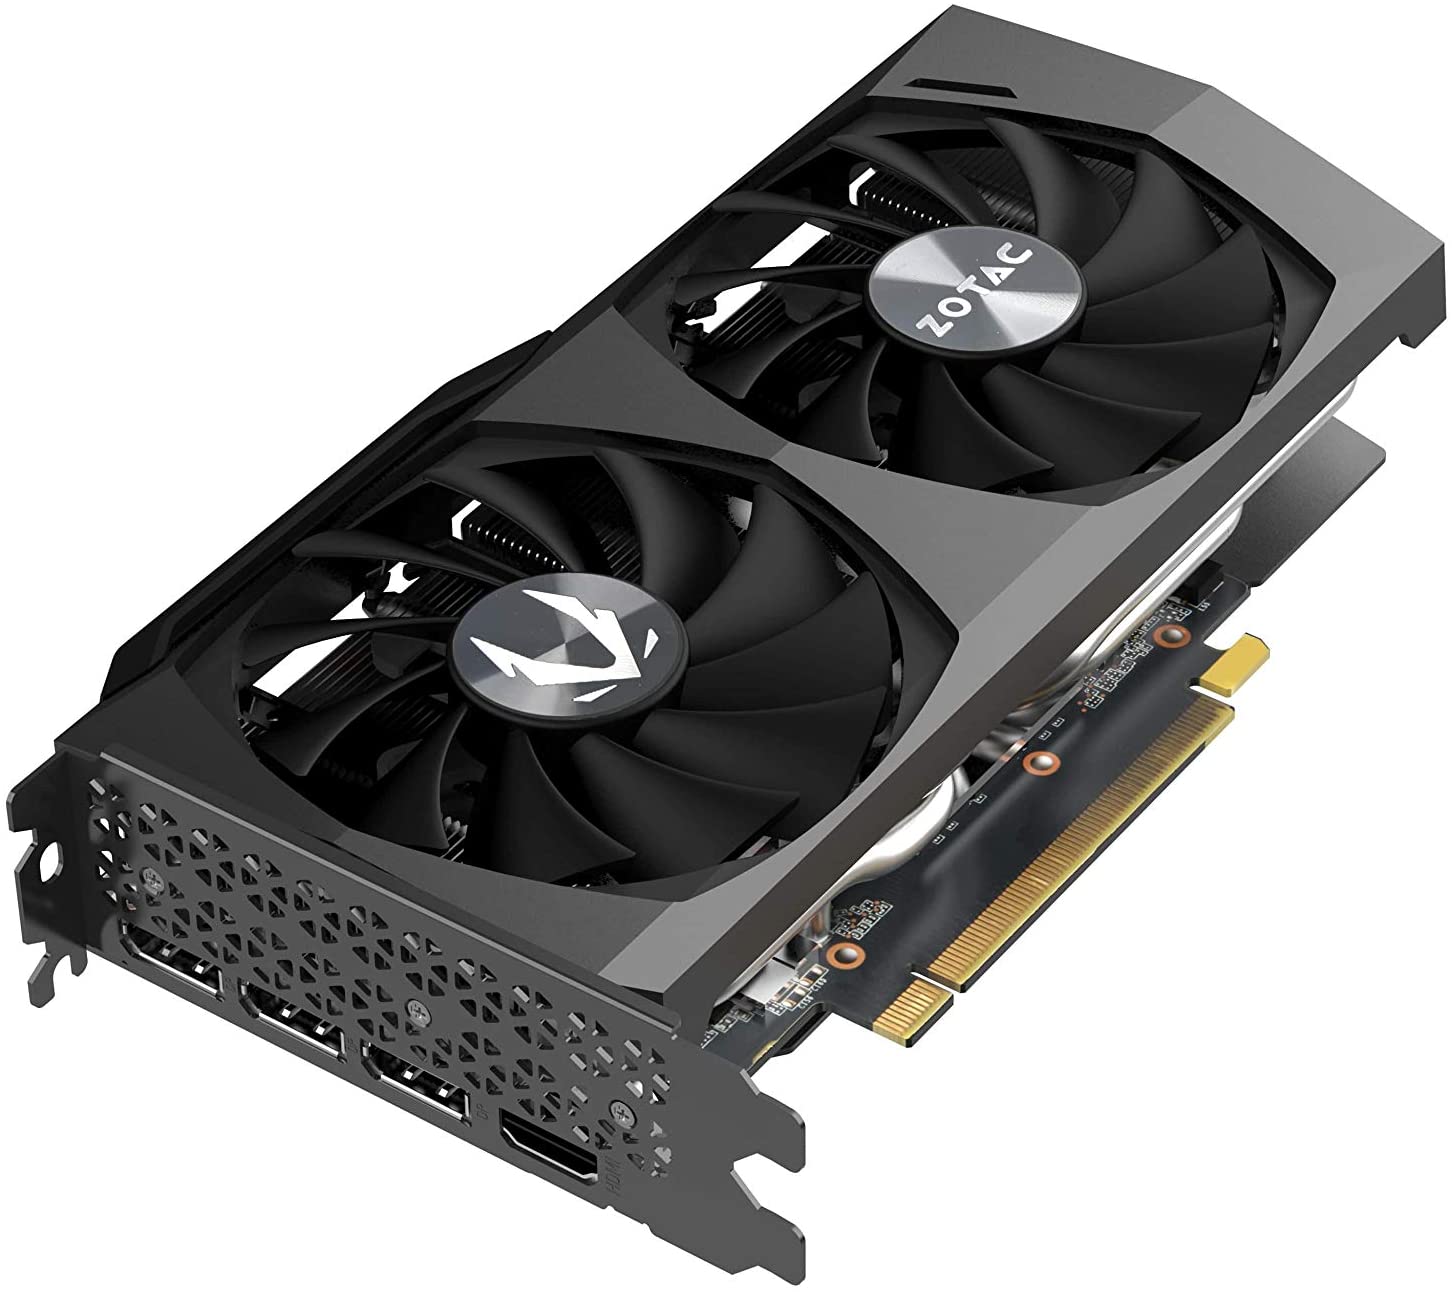 Zotac Gaming GeForce RTX 3060 Twin Edge OC 12GB GDDR6 192-bit 15 Gbps PCIE 4.0 Gaming Graphics Card, IceStorm 2.0 Cooling, Activ-0